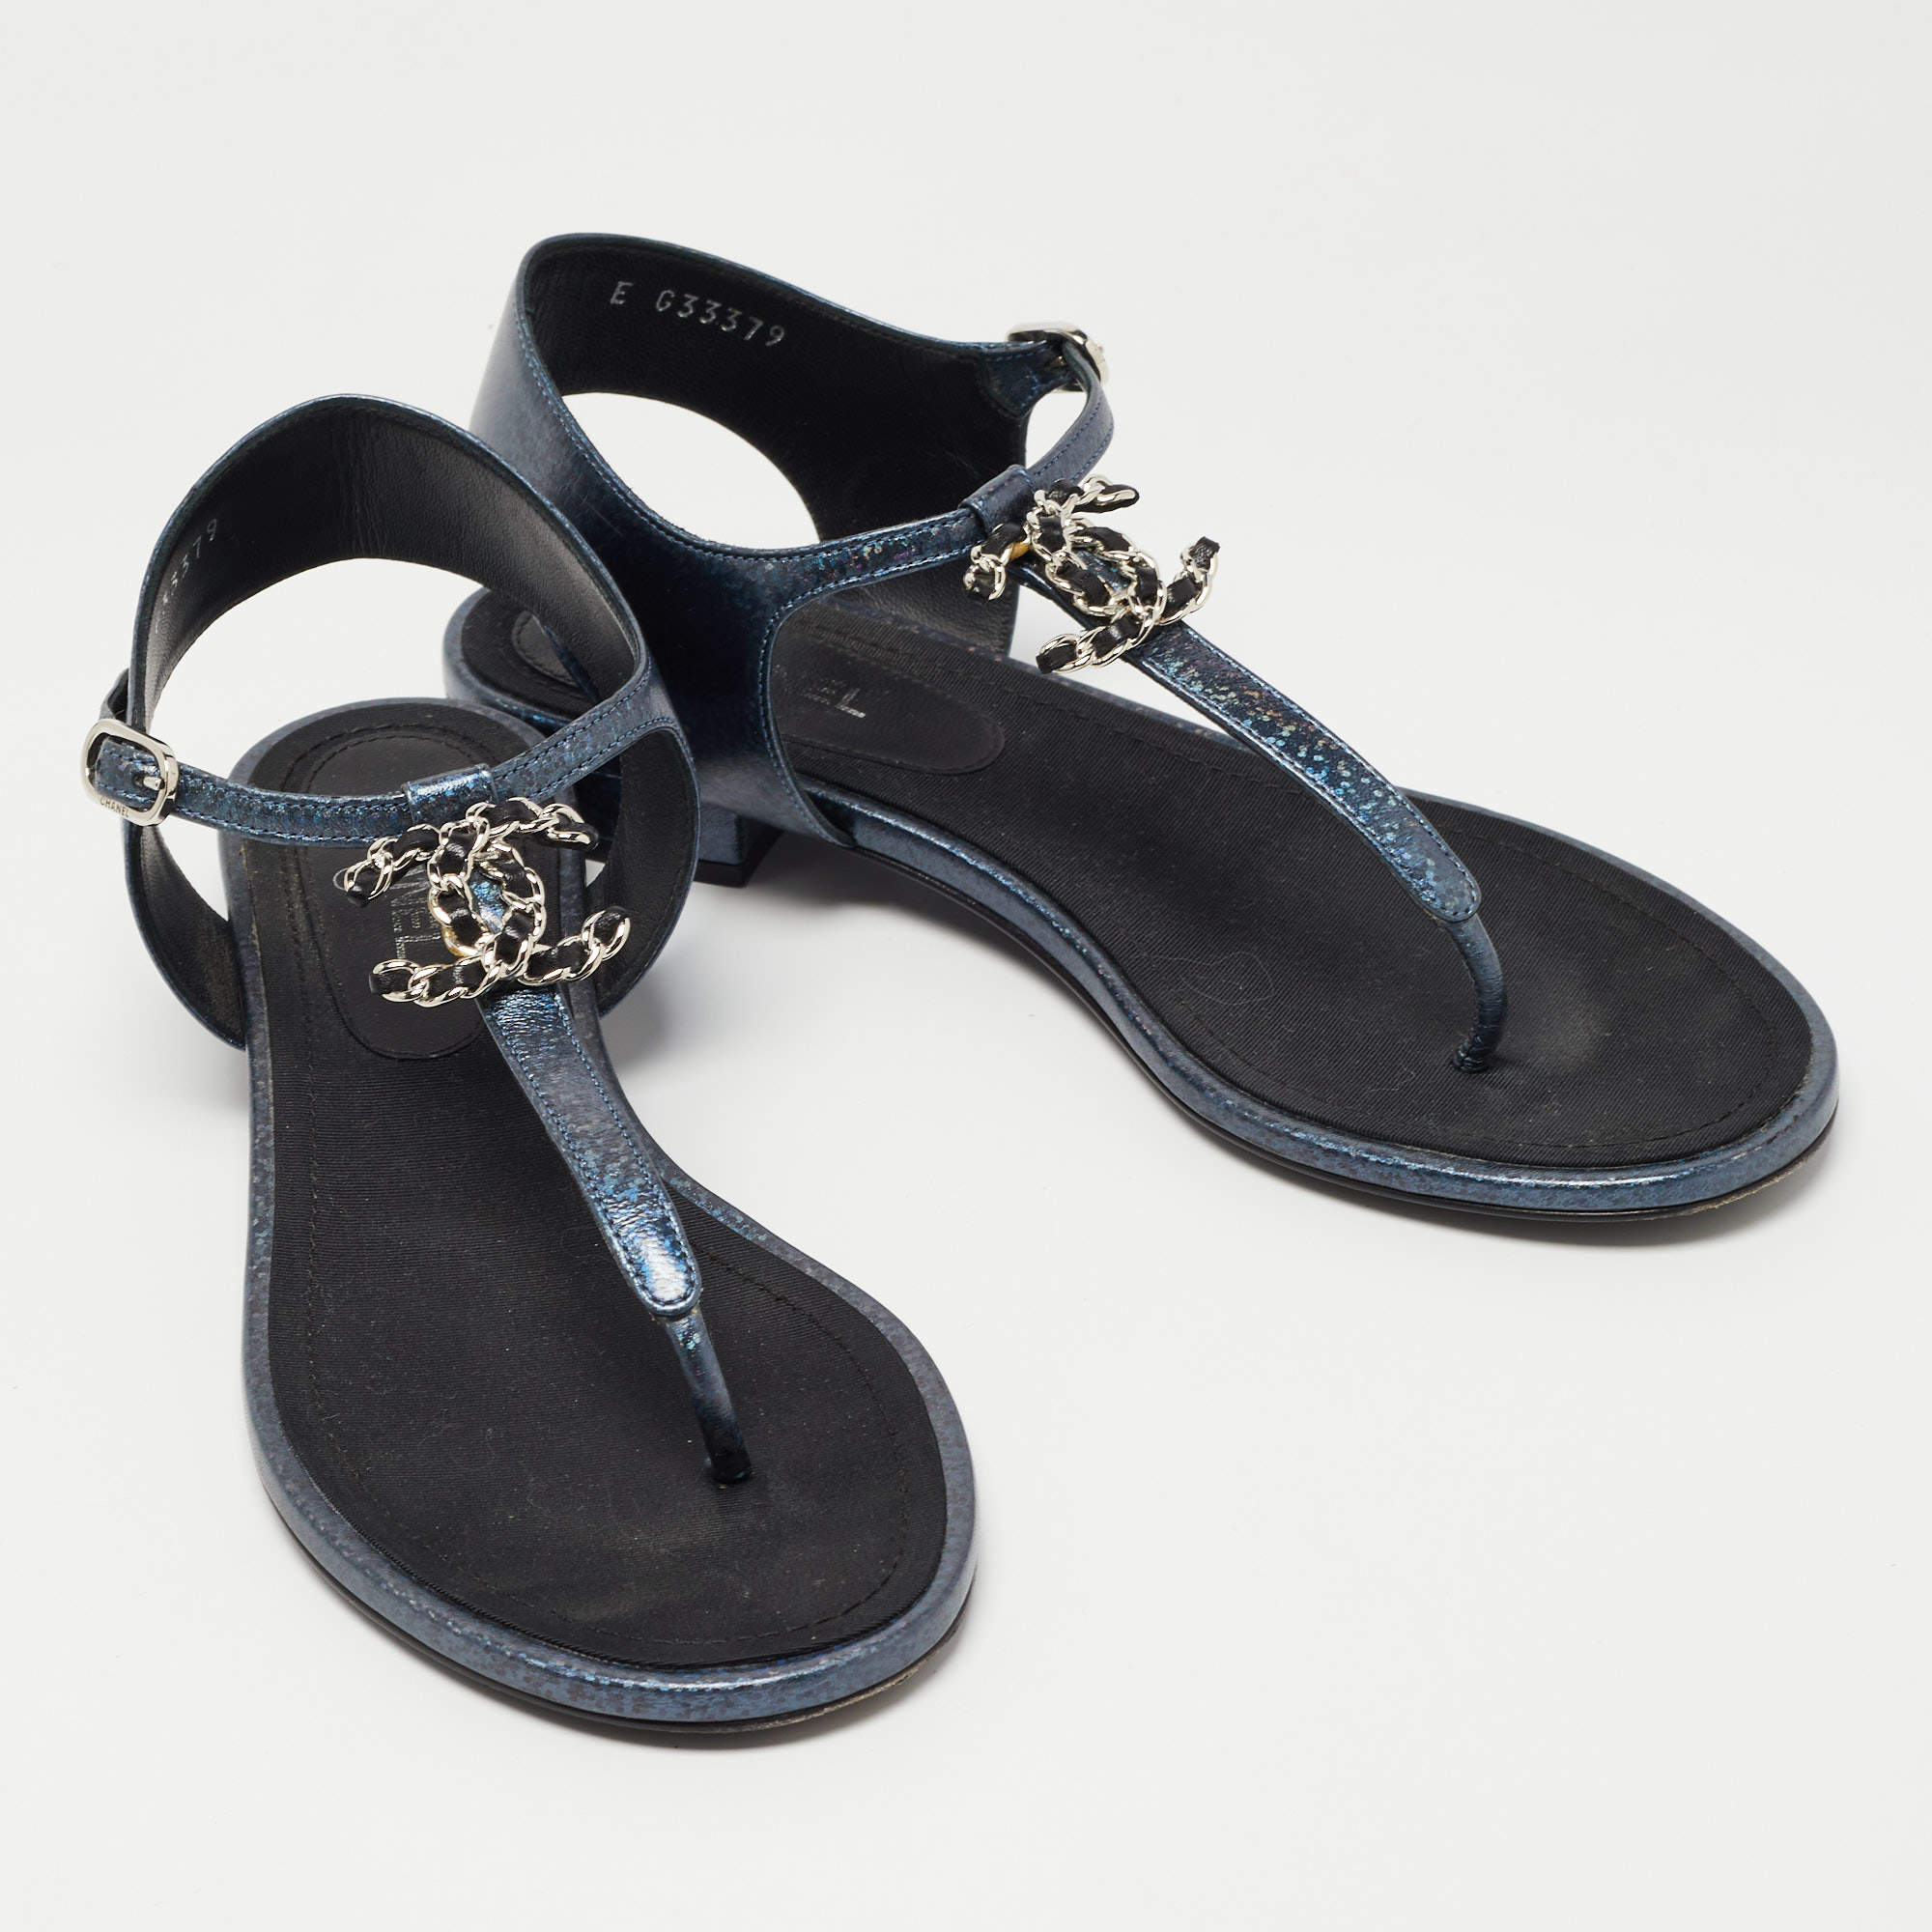 Chanel Dark Blue Leather CC Flat Thong Sandals Size 38 Chanel